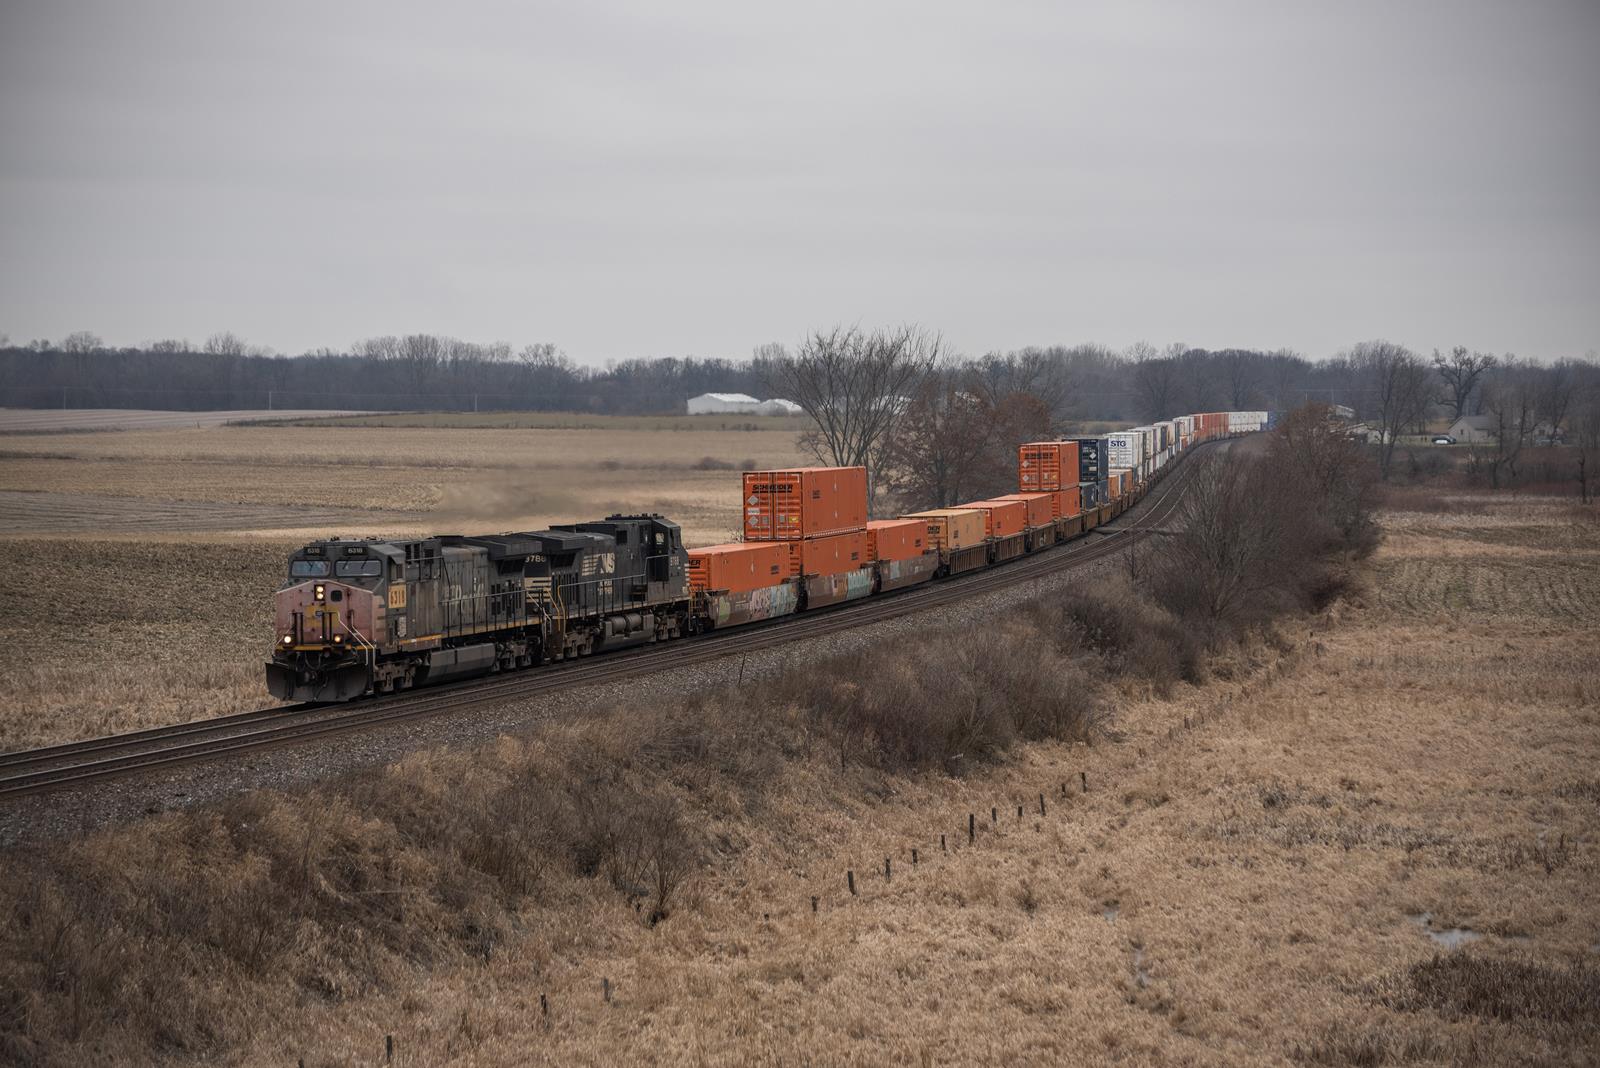 UP 6318 is a class GE AC4400CW and  is pictured in Kimmel, Indiana, USA.  This was taken along the Garrett Subdivision on the CSX Transportation. Photo Copyright: Spencer Harman uploaded to Railroad Gallery on 01/07/2023. This photograph of UP 6318 was taken on Saturday, January 07, 2023. All Rights Reserved. 